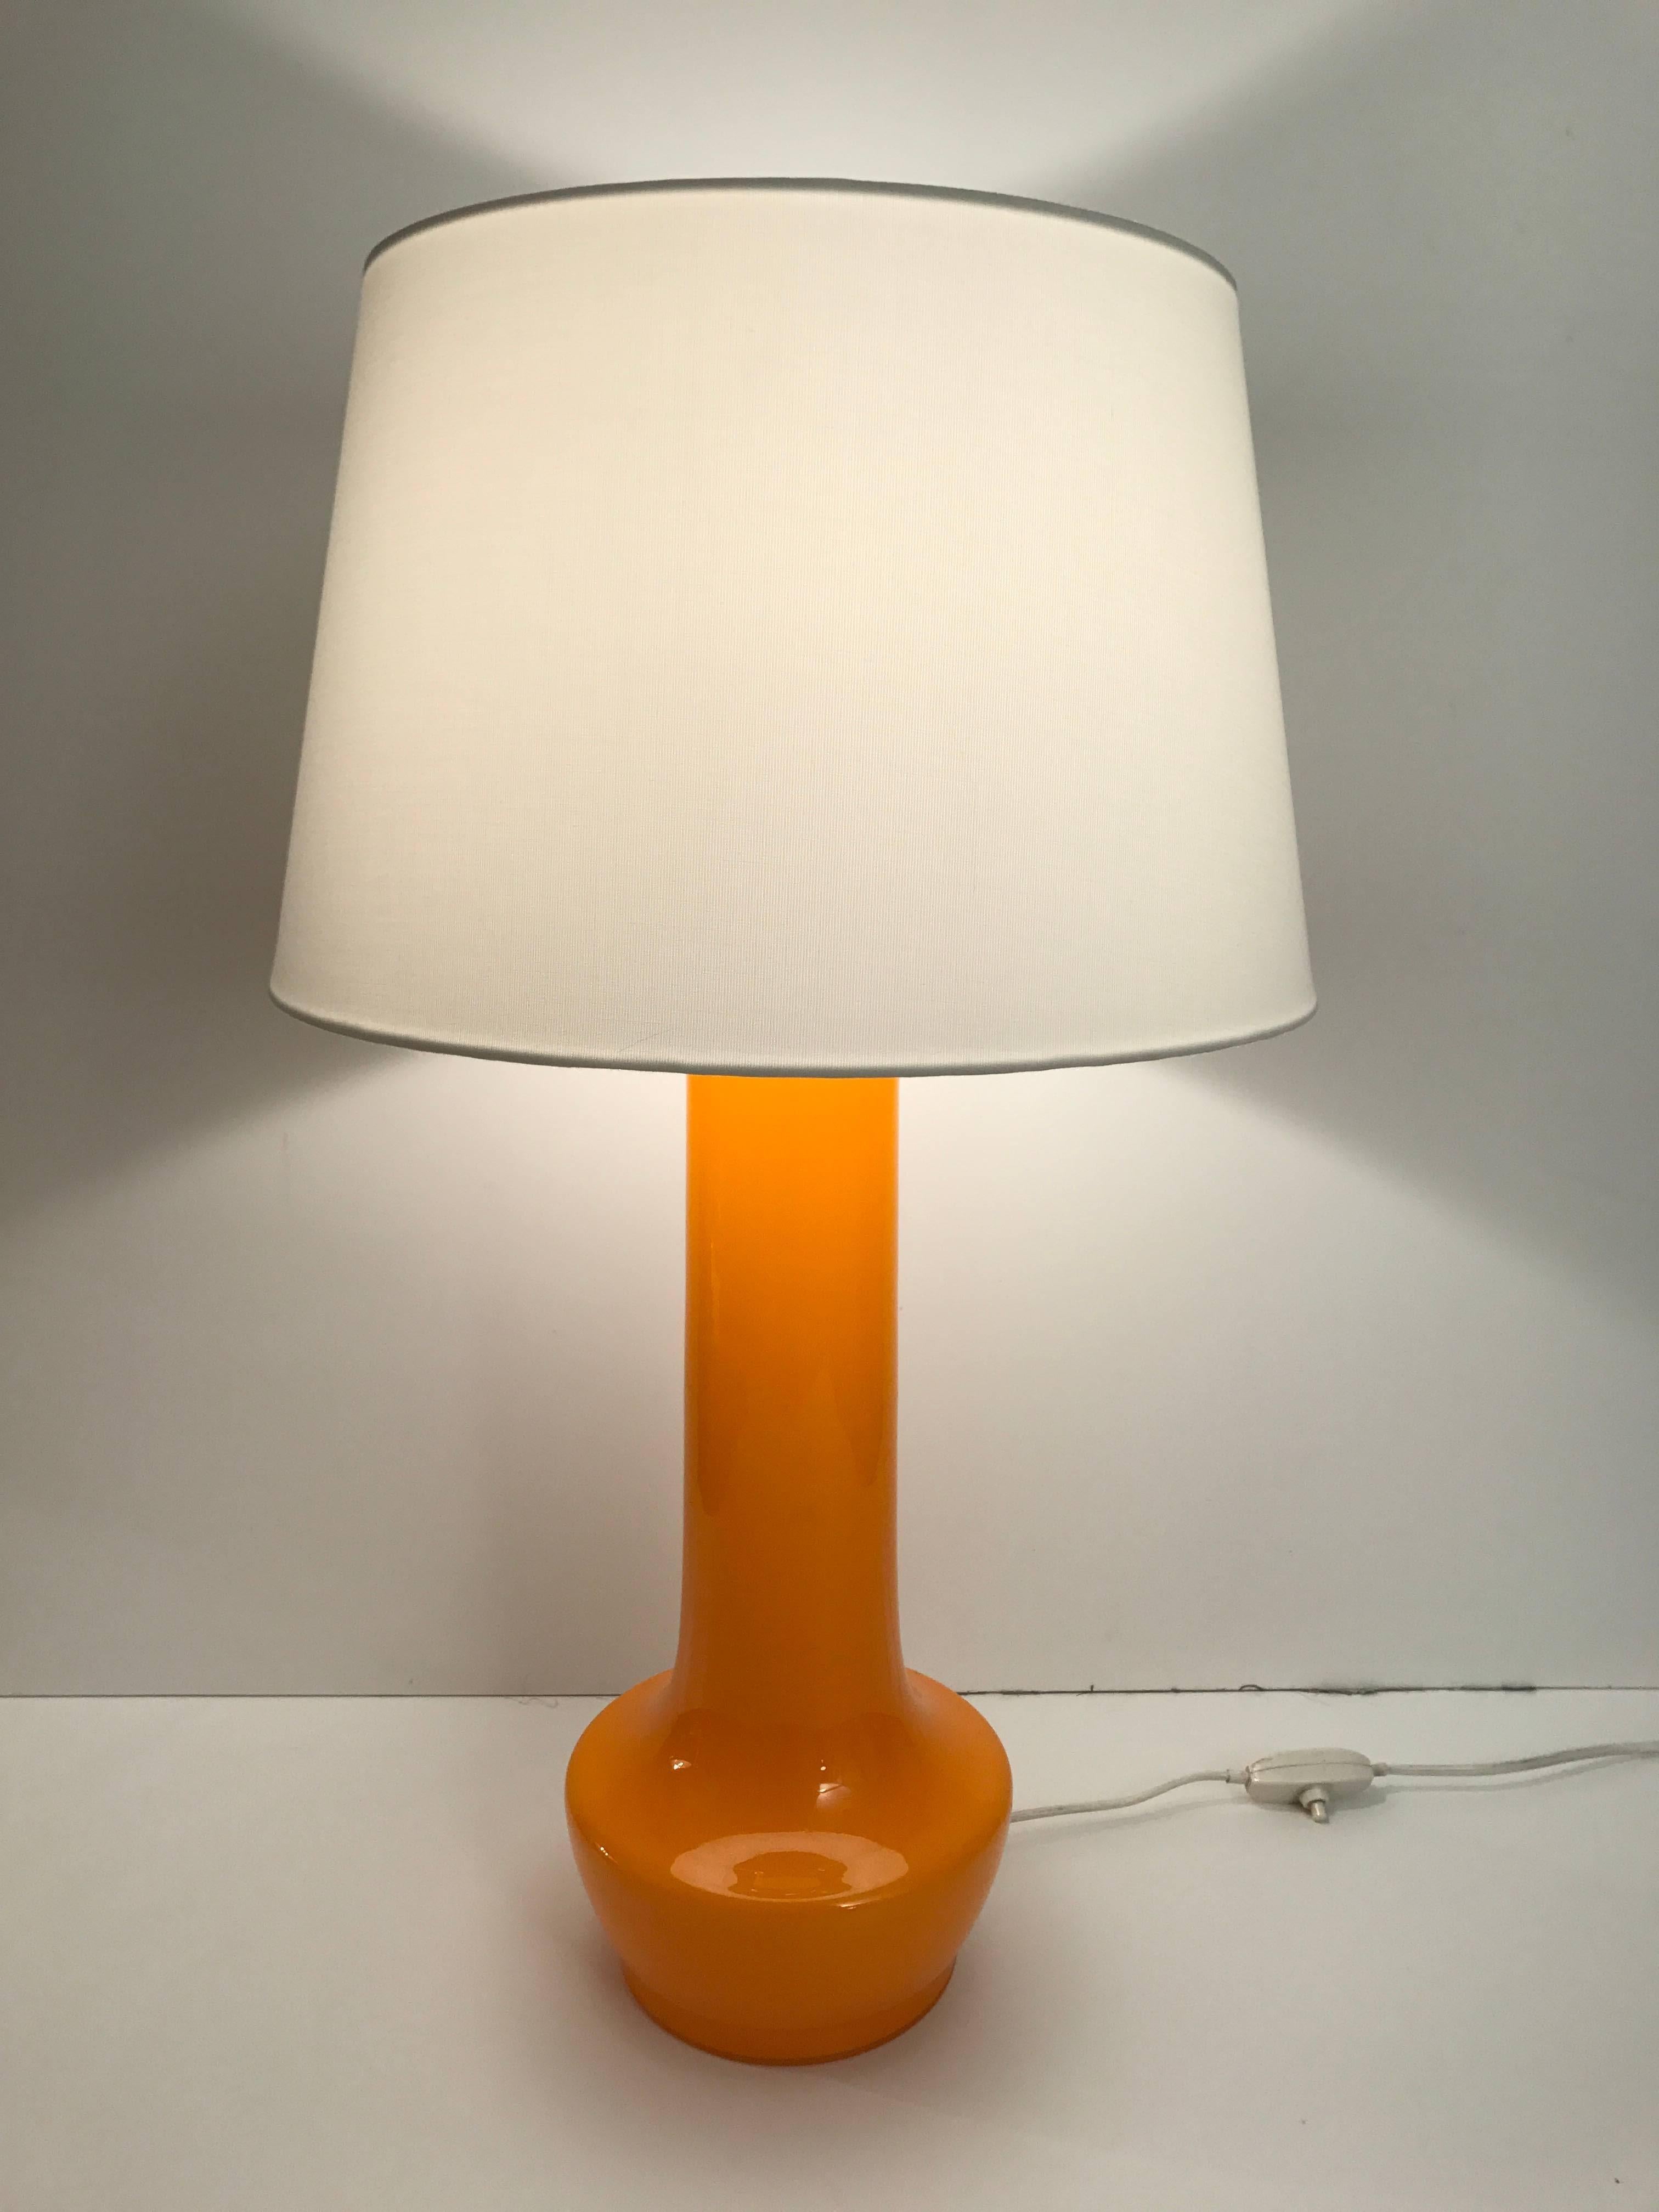 1975 large Swedish Alsterfors orange glass table lamps Designed by Per Olof Ström.
A beautiful large pair of glass table lamps made in the glass factory of Alsterfors in the mid-1960s. They are in top condition and all wires have been rewired with